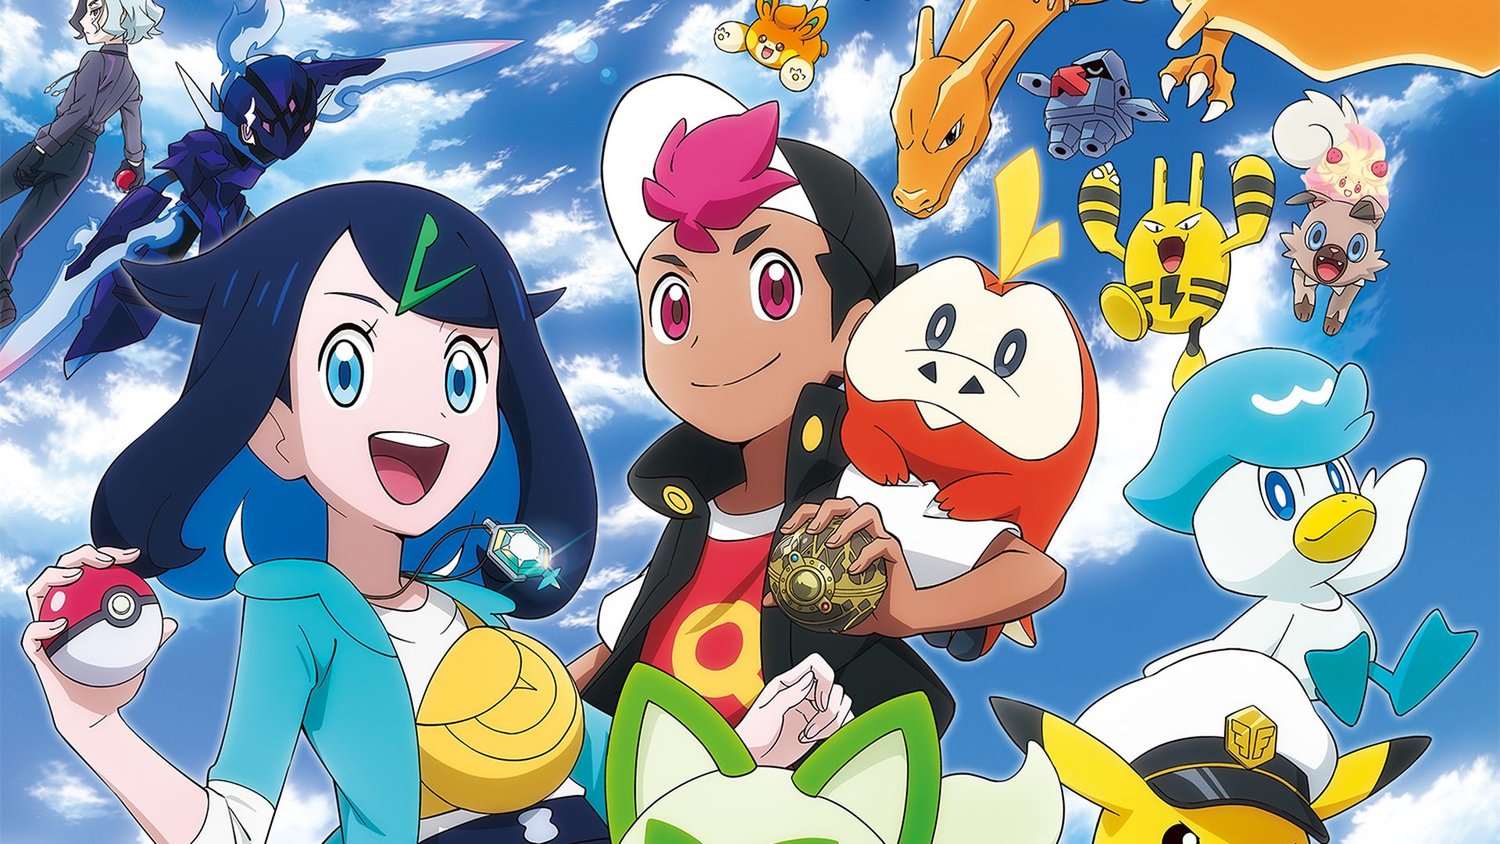 Pokemon Horizons Episode 4 sub: Release Date and where to watch